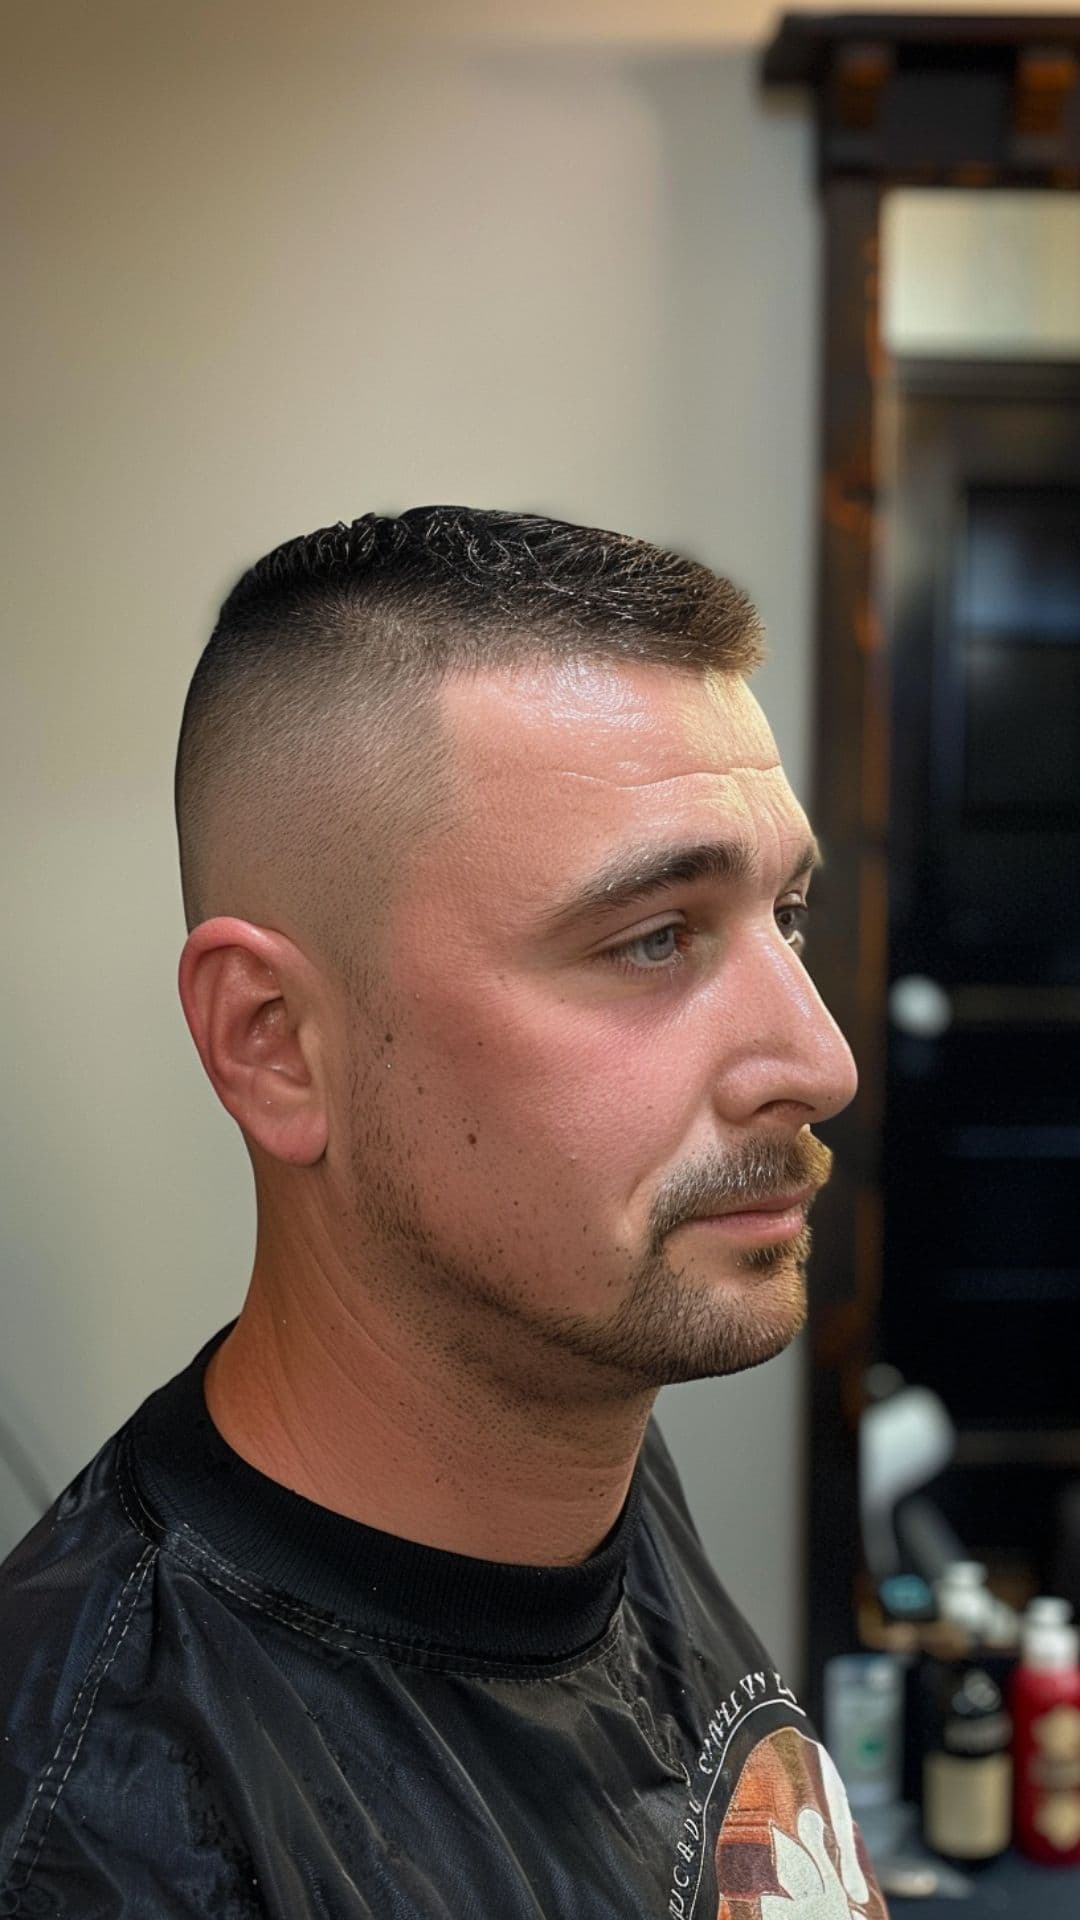 A middle aged man modelling a high and tight haircut.